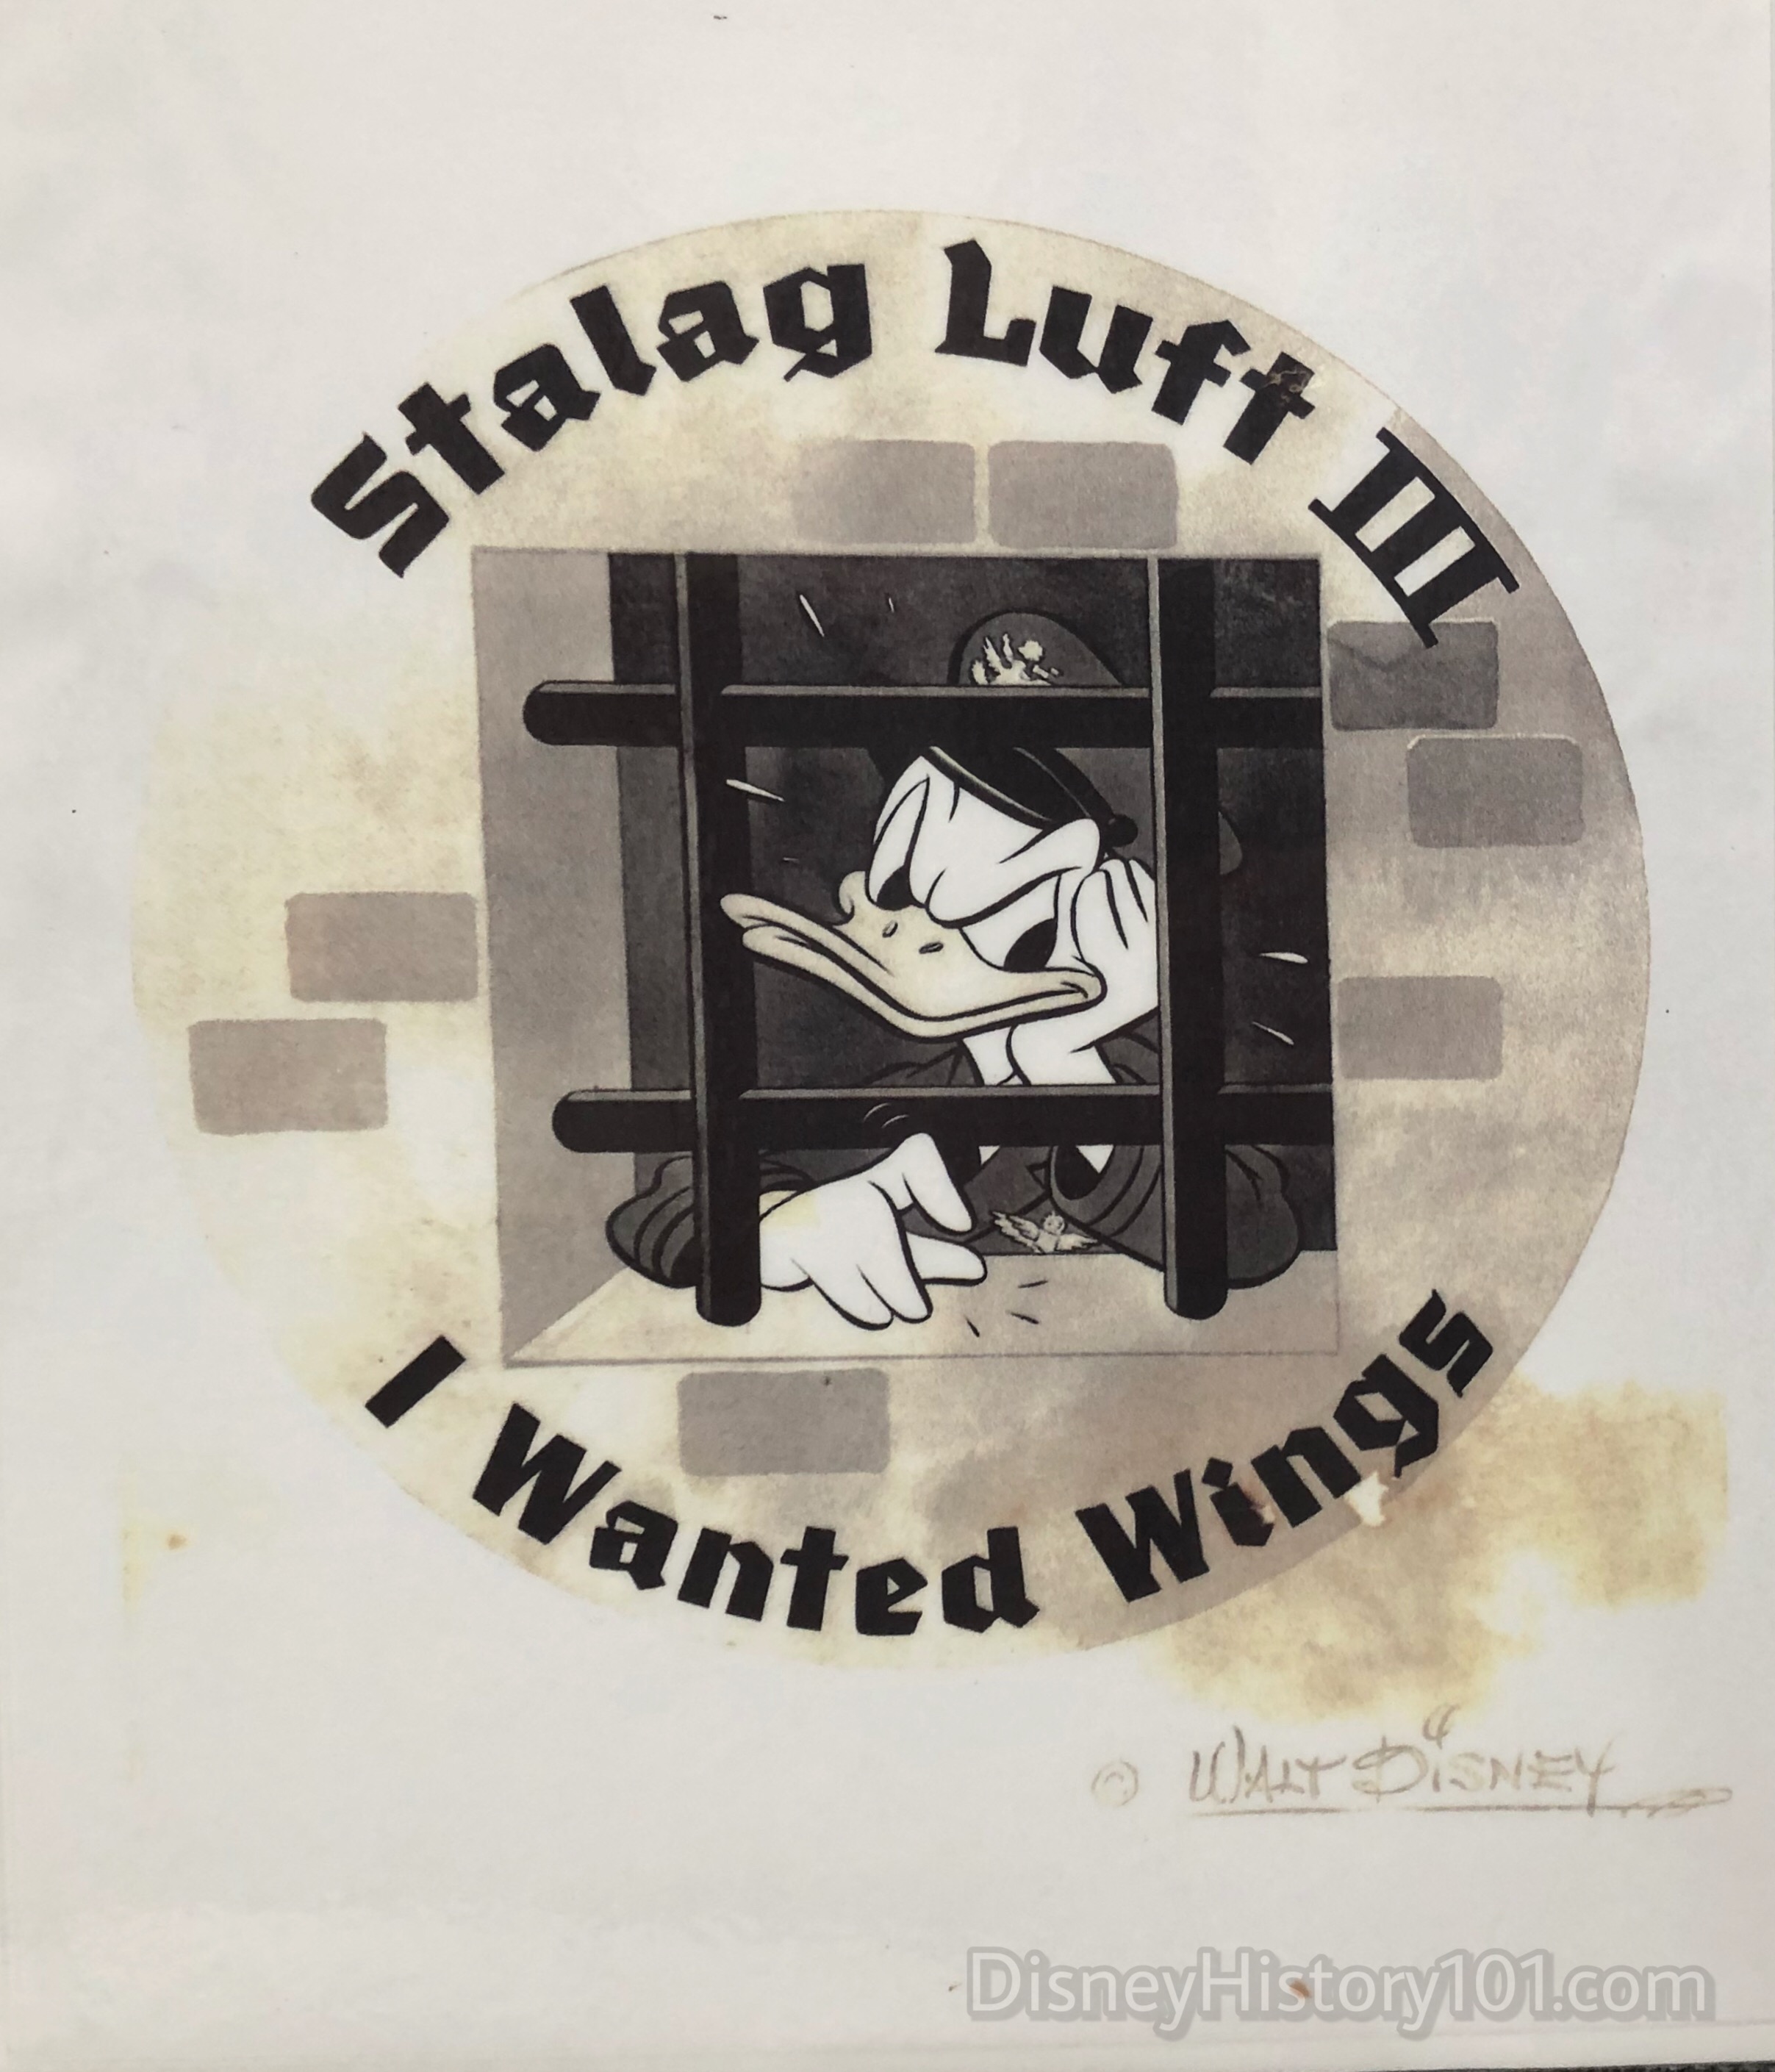 STALAG LUFT finished insignia